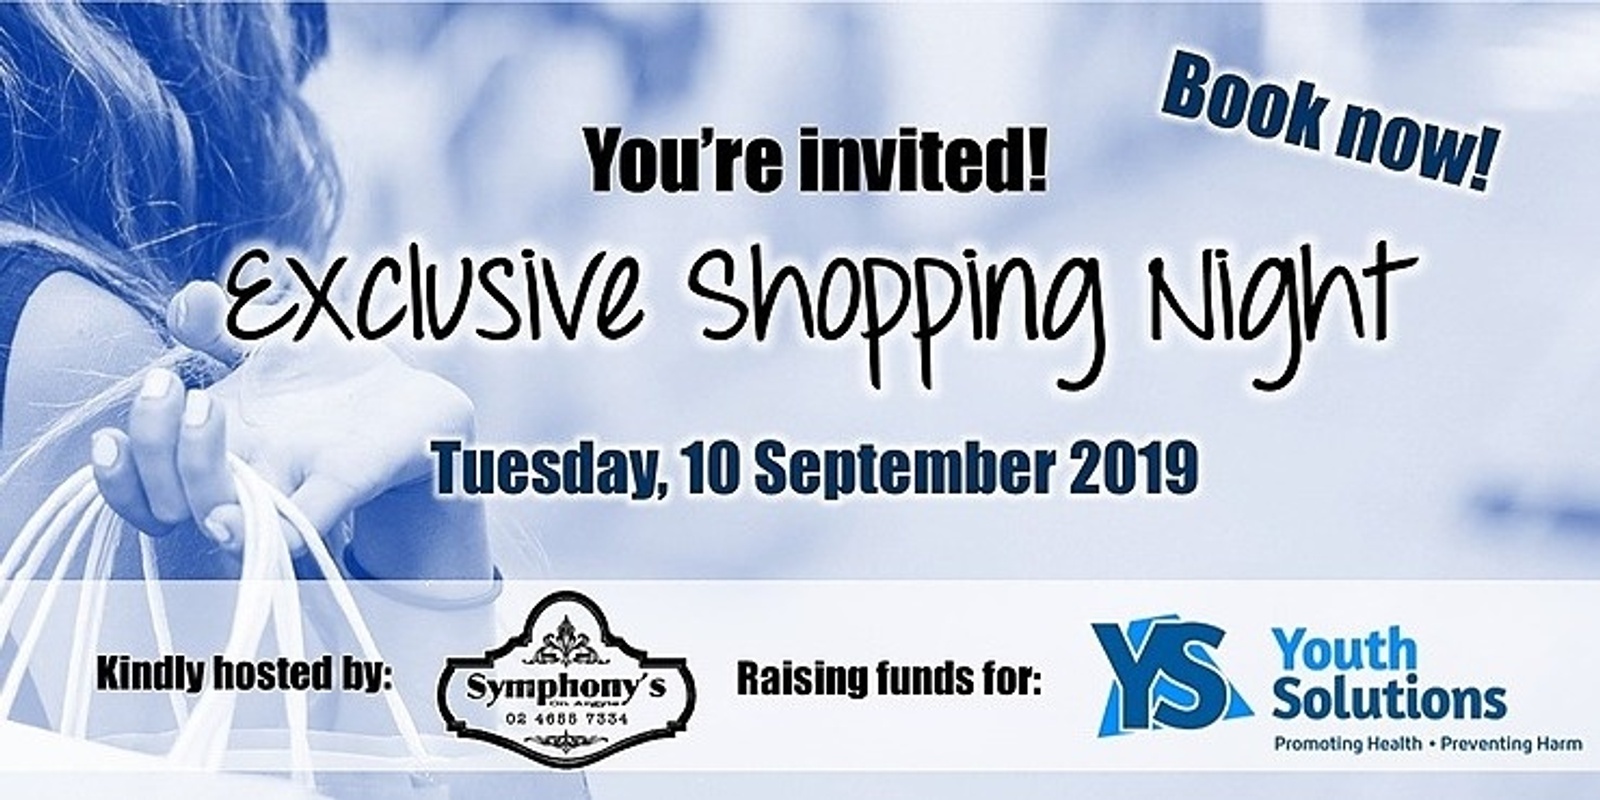 Banner image for Youth Solutions 2019 Exclusive Shopping Night